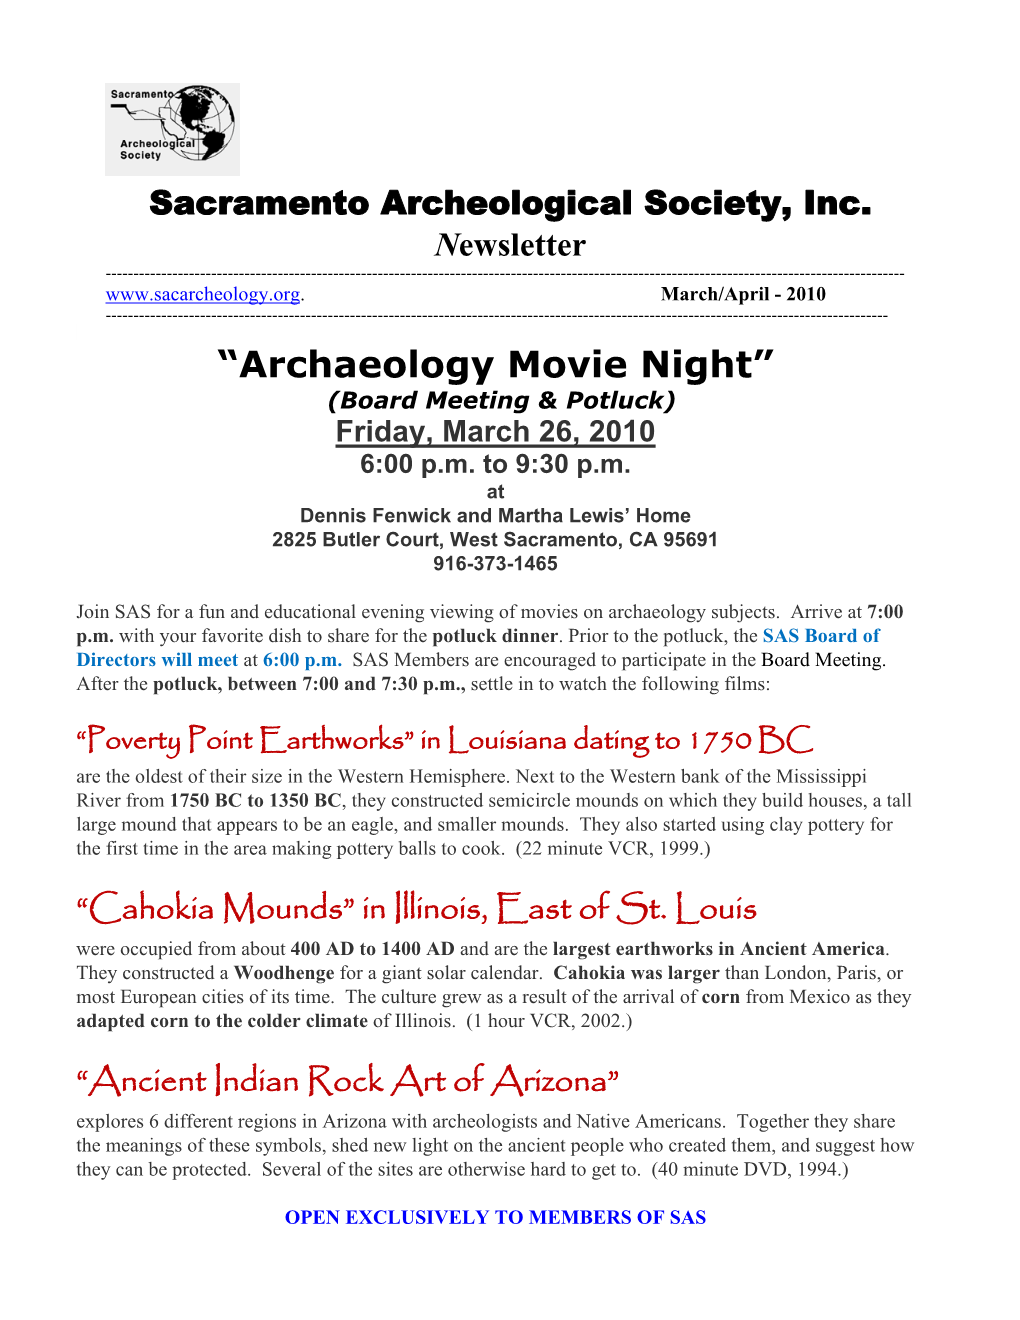 “Archaeology Movie Night” (Board Meeting & Potluck) Friday, March 26, 2010 6:00 P.M